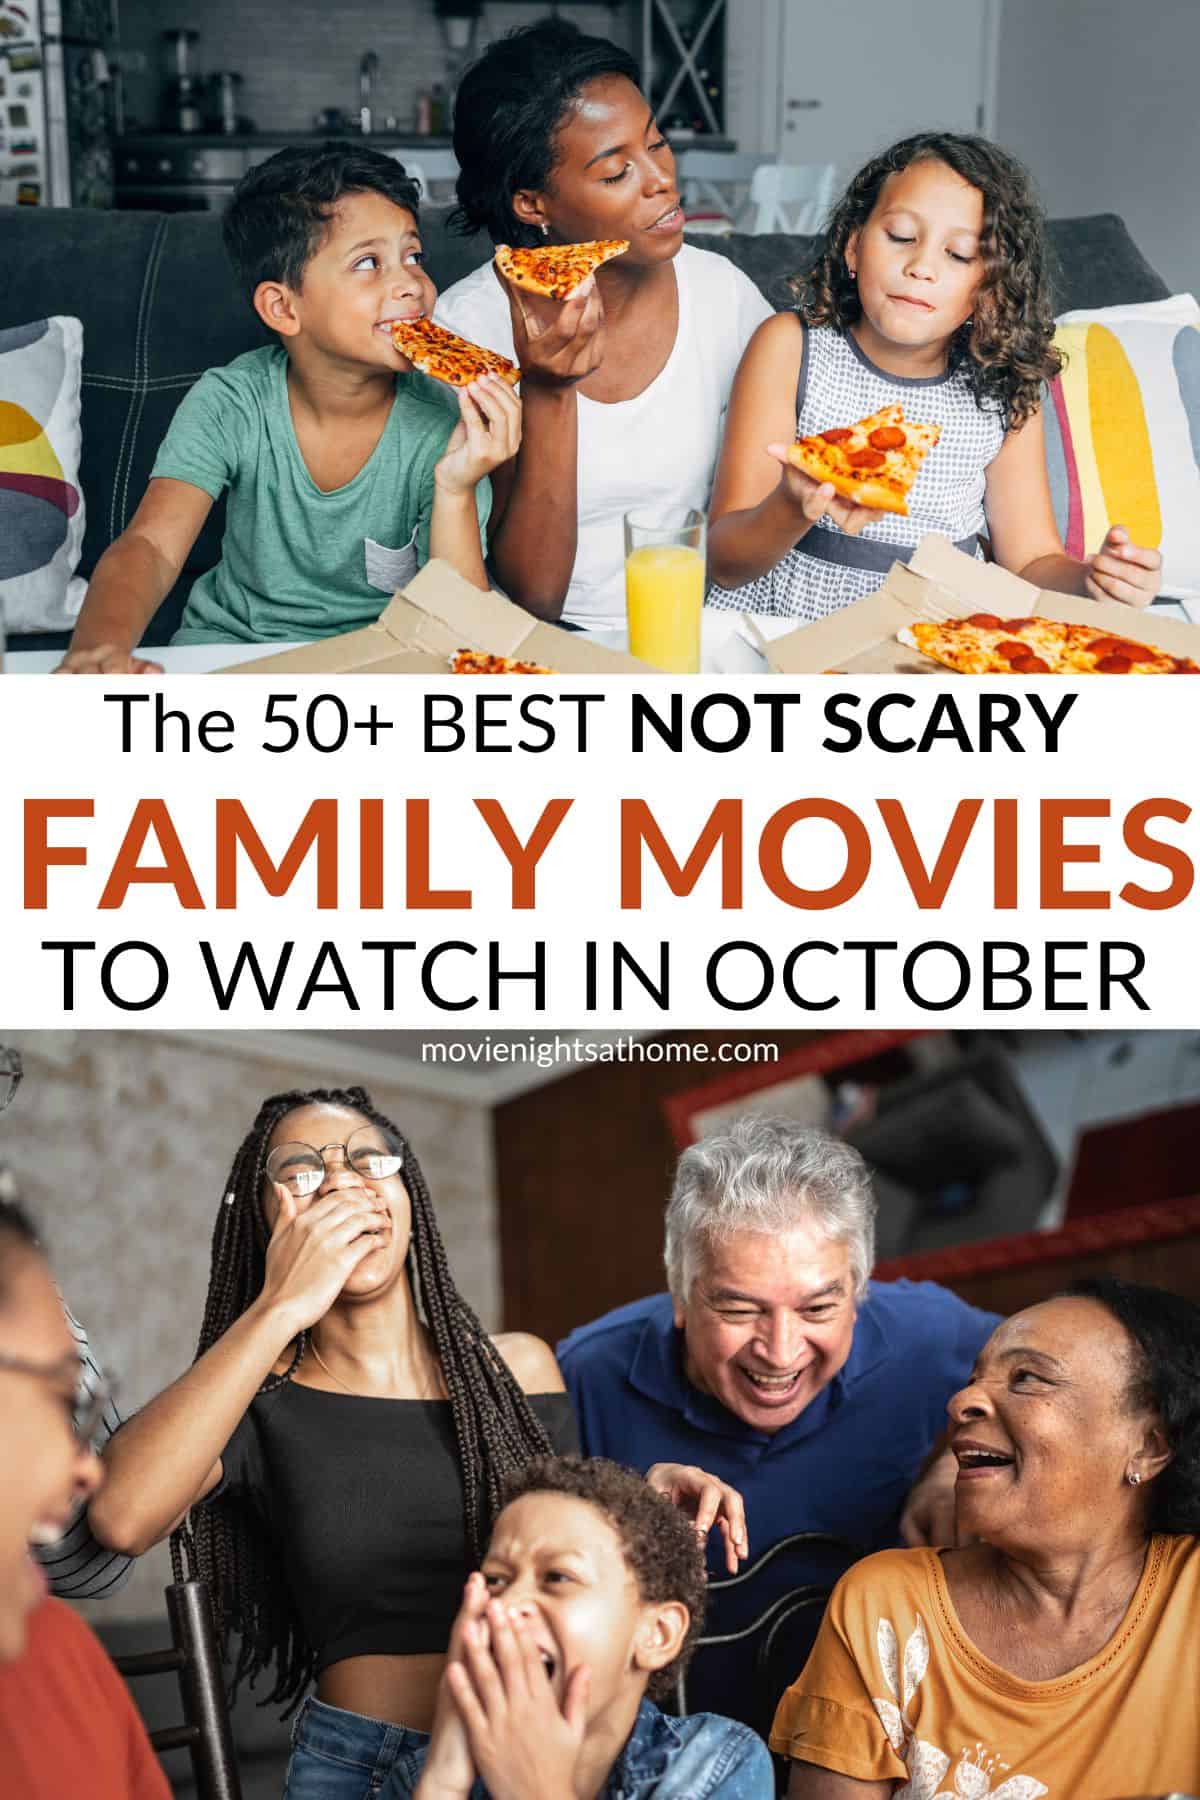 collage of two different families enjoying time at home together - text overlay in the middle says the 50+ best not-scary family movies to watch in october